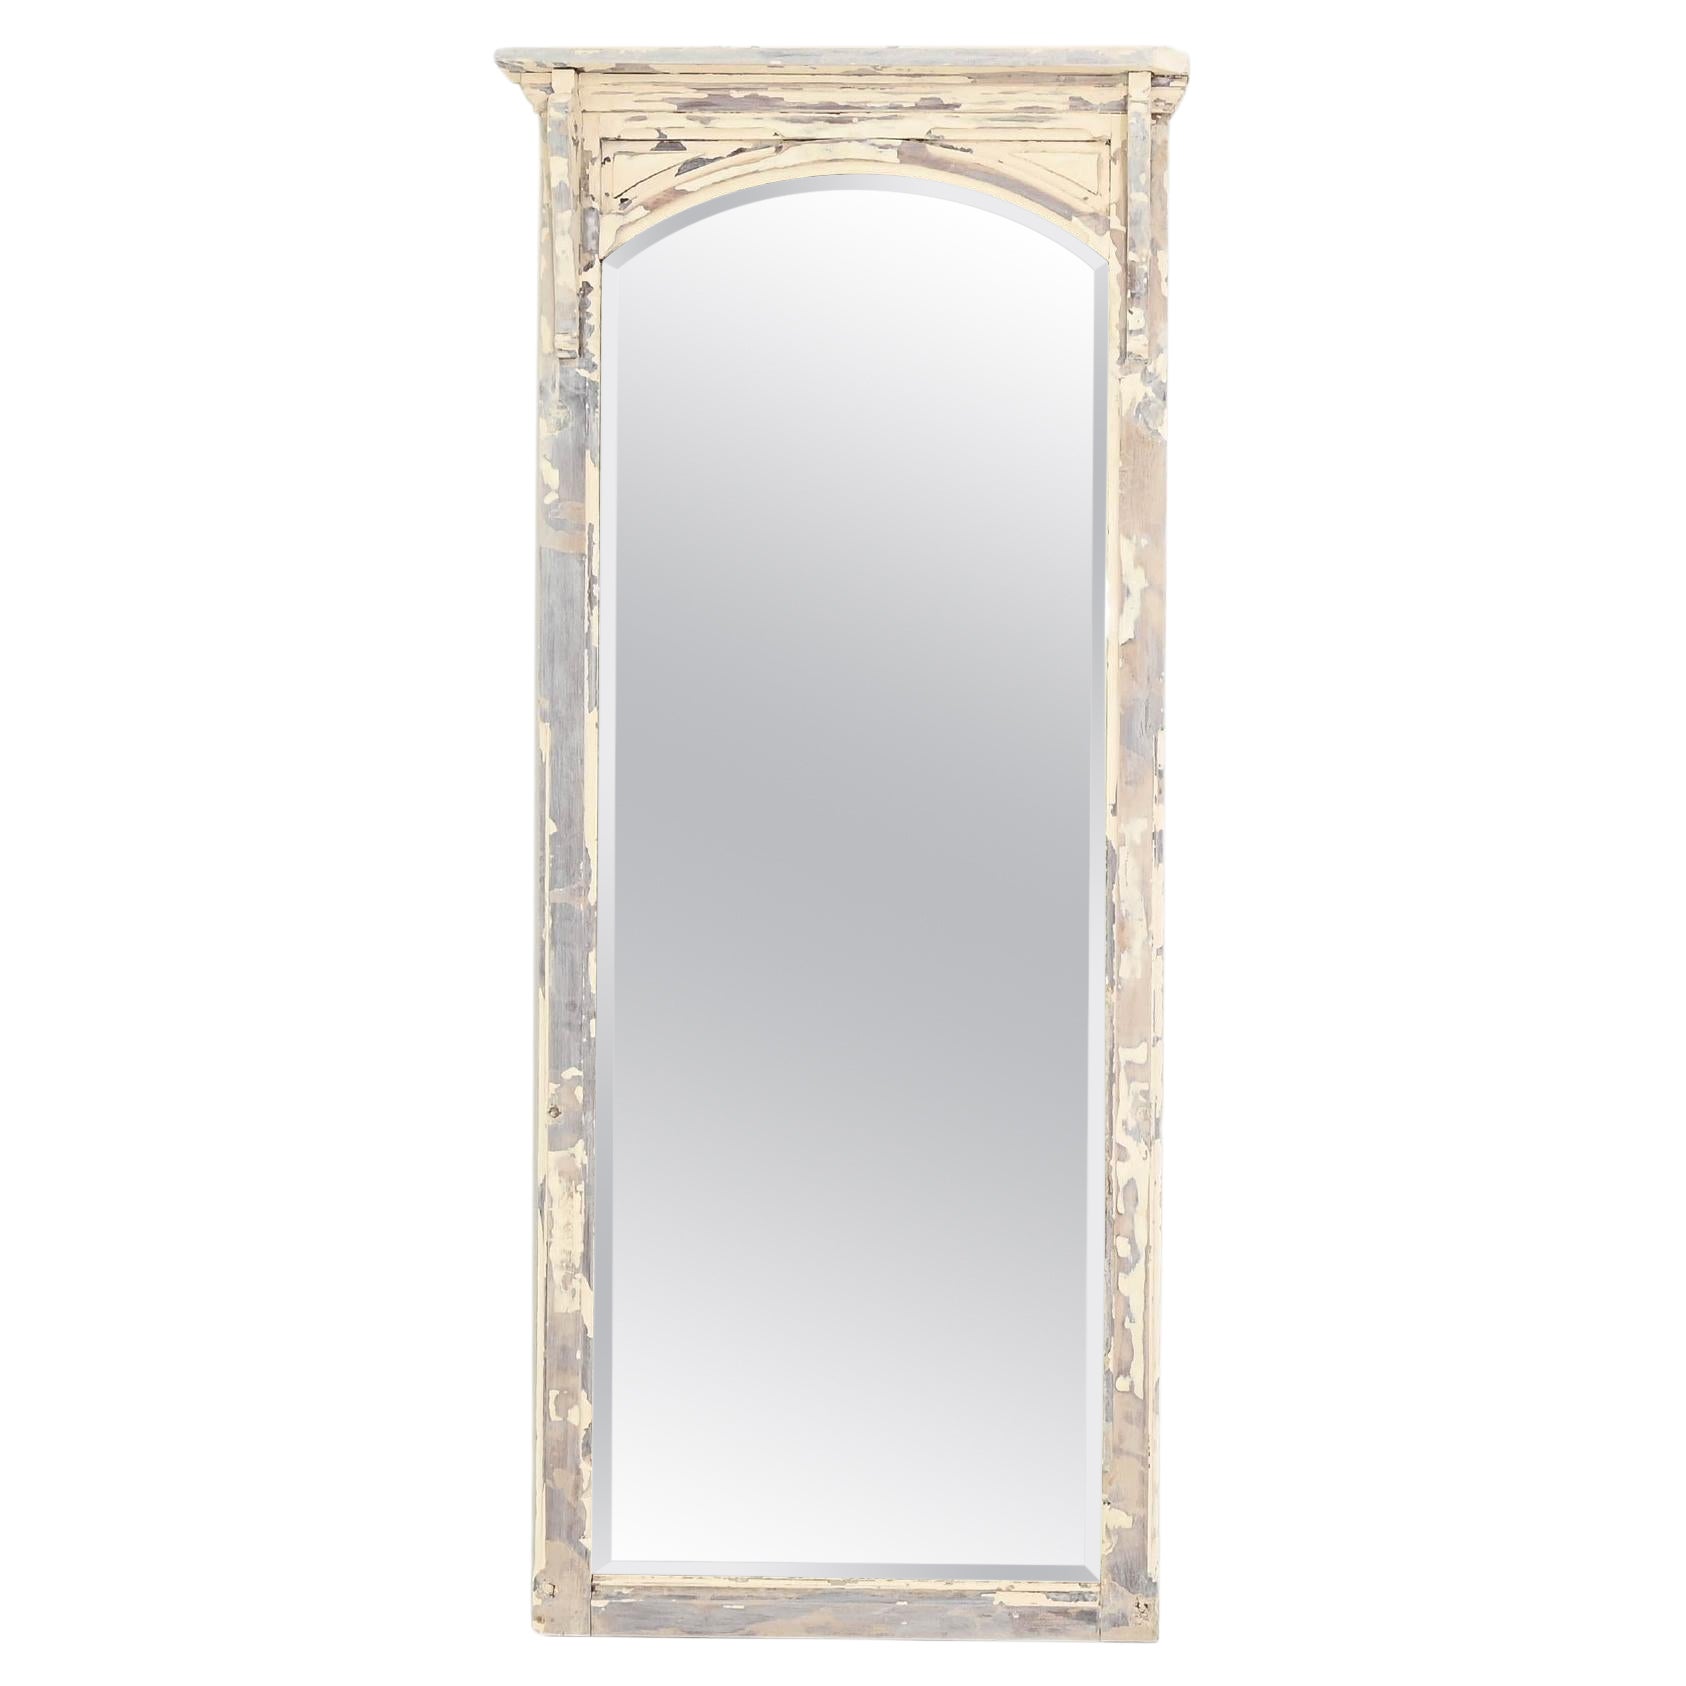 Early 20th Century French Wooden White Patinated Mirror